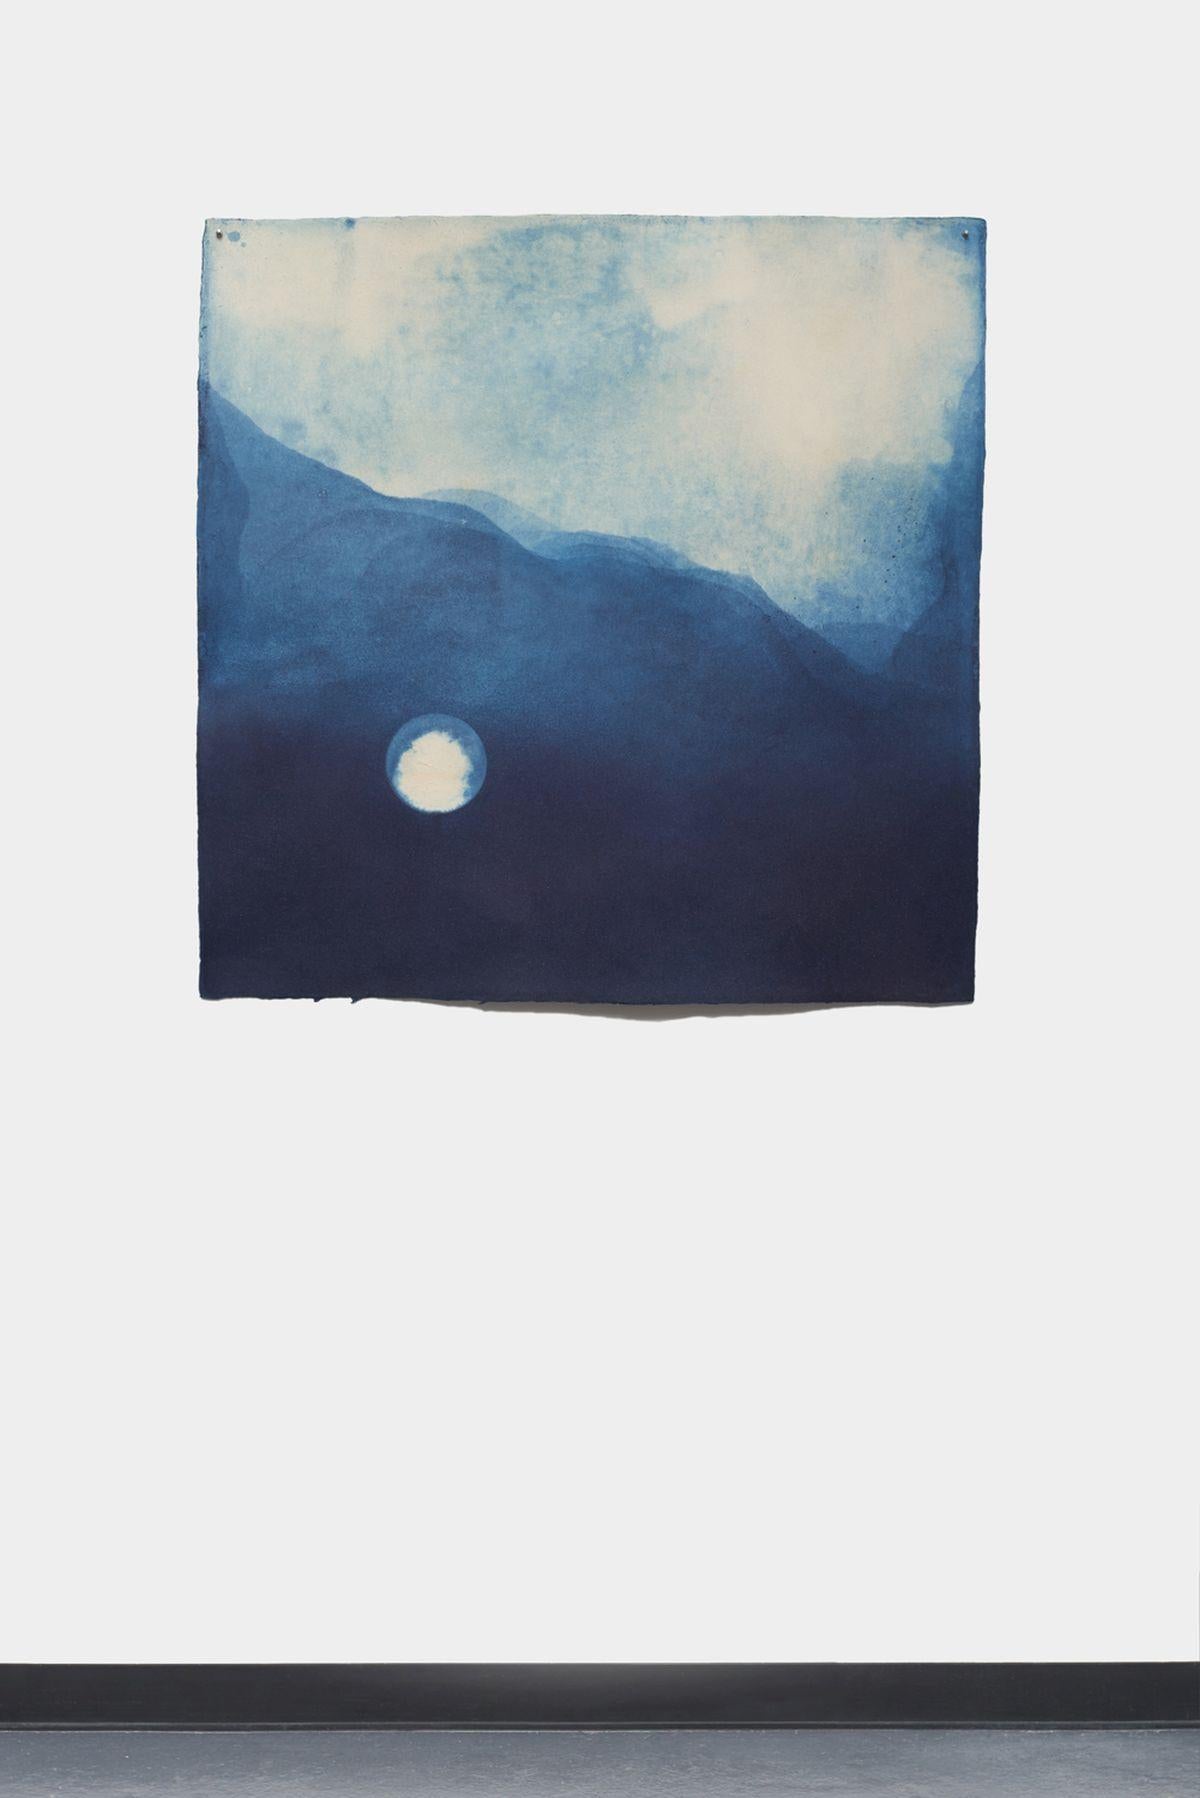 Natural indigo and pure silver on paper, painting of the moon over the mountains - Painting by Miya Ando